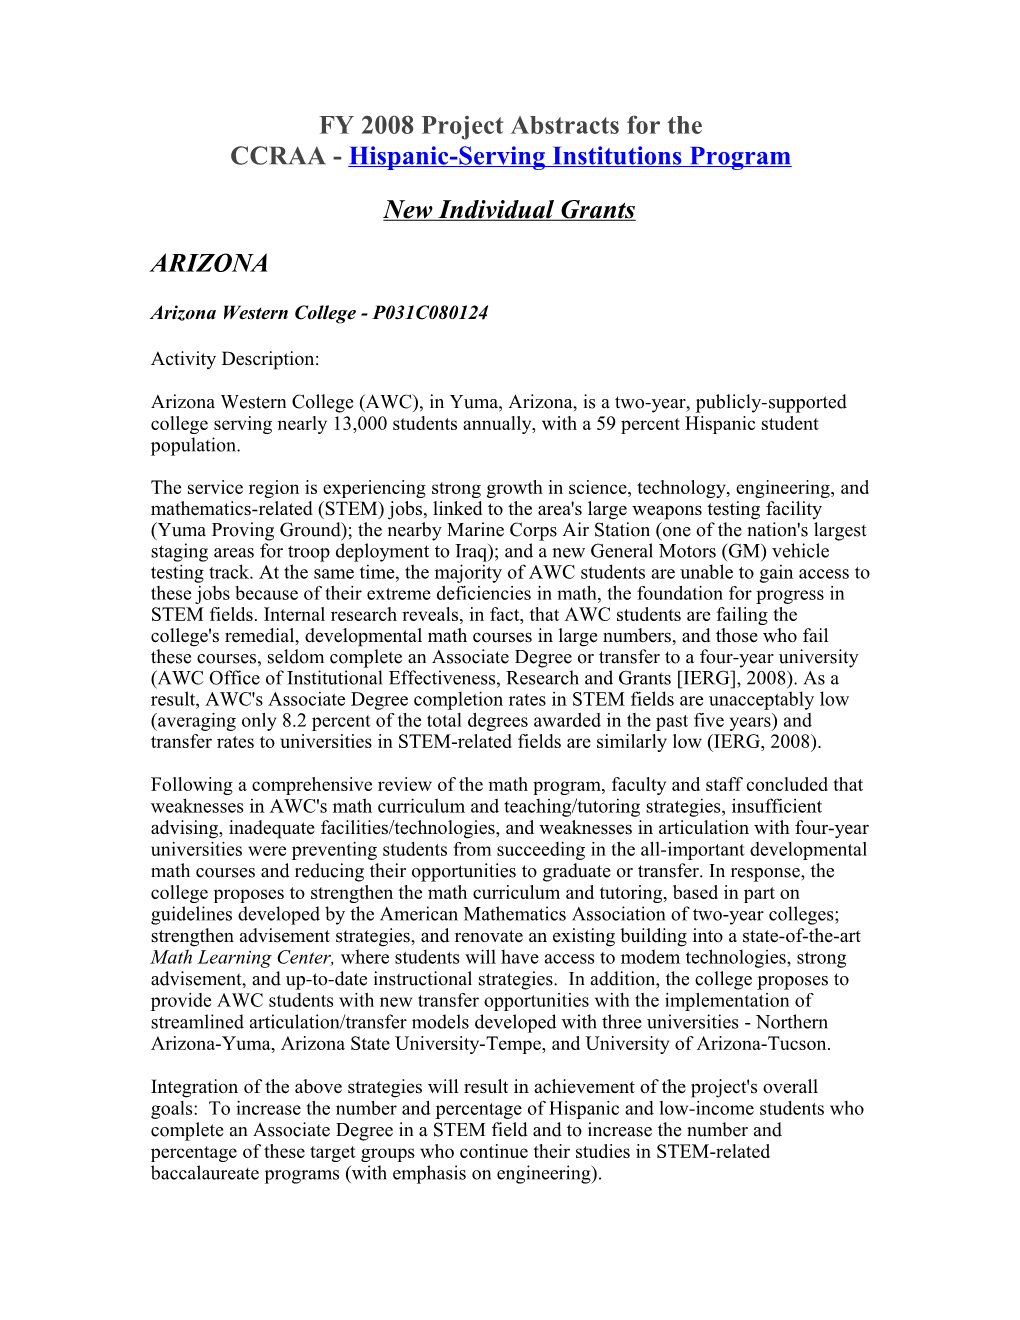 FY 2008 Project Abstracts for the CCRAA Hispanic-Serving Institutions Program (MS Word)